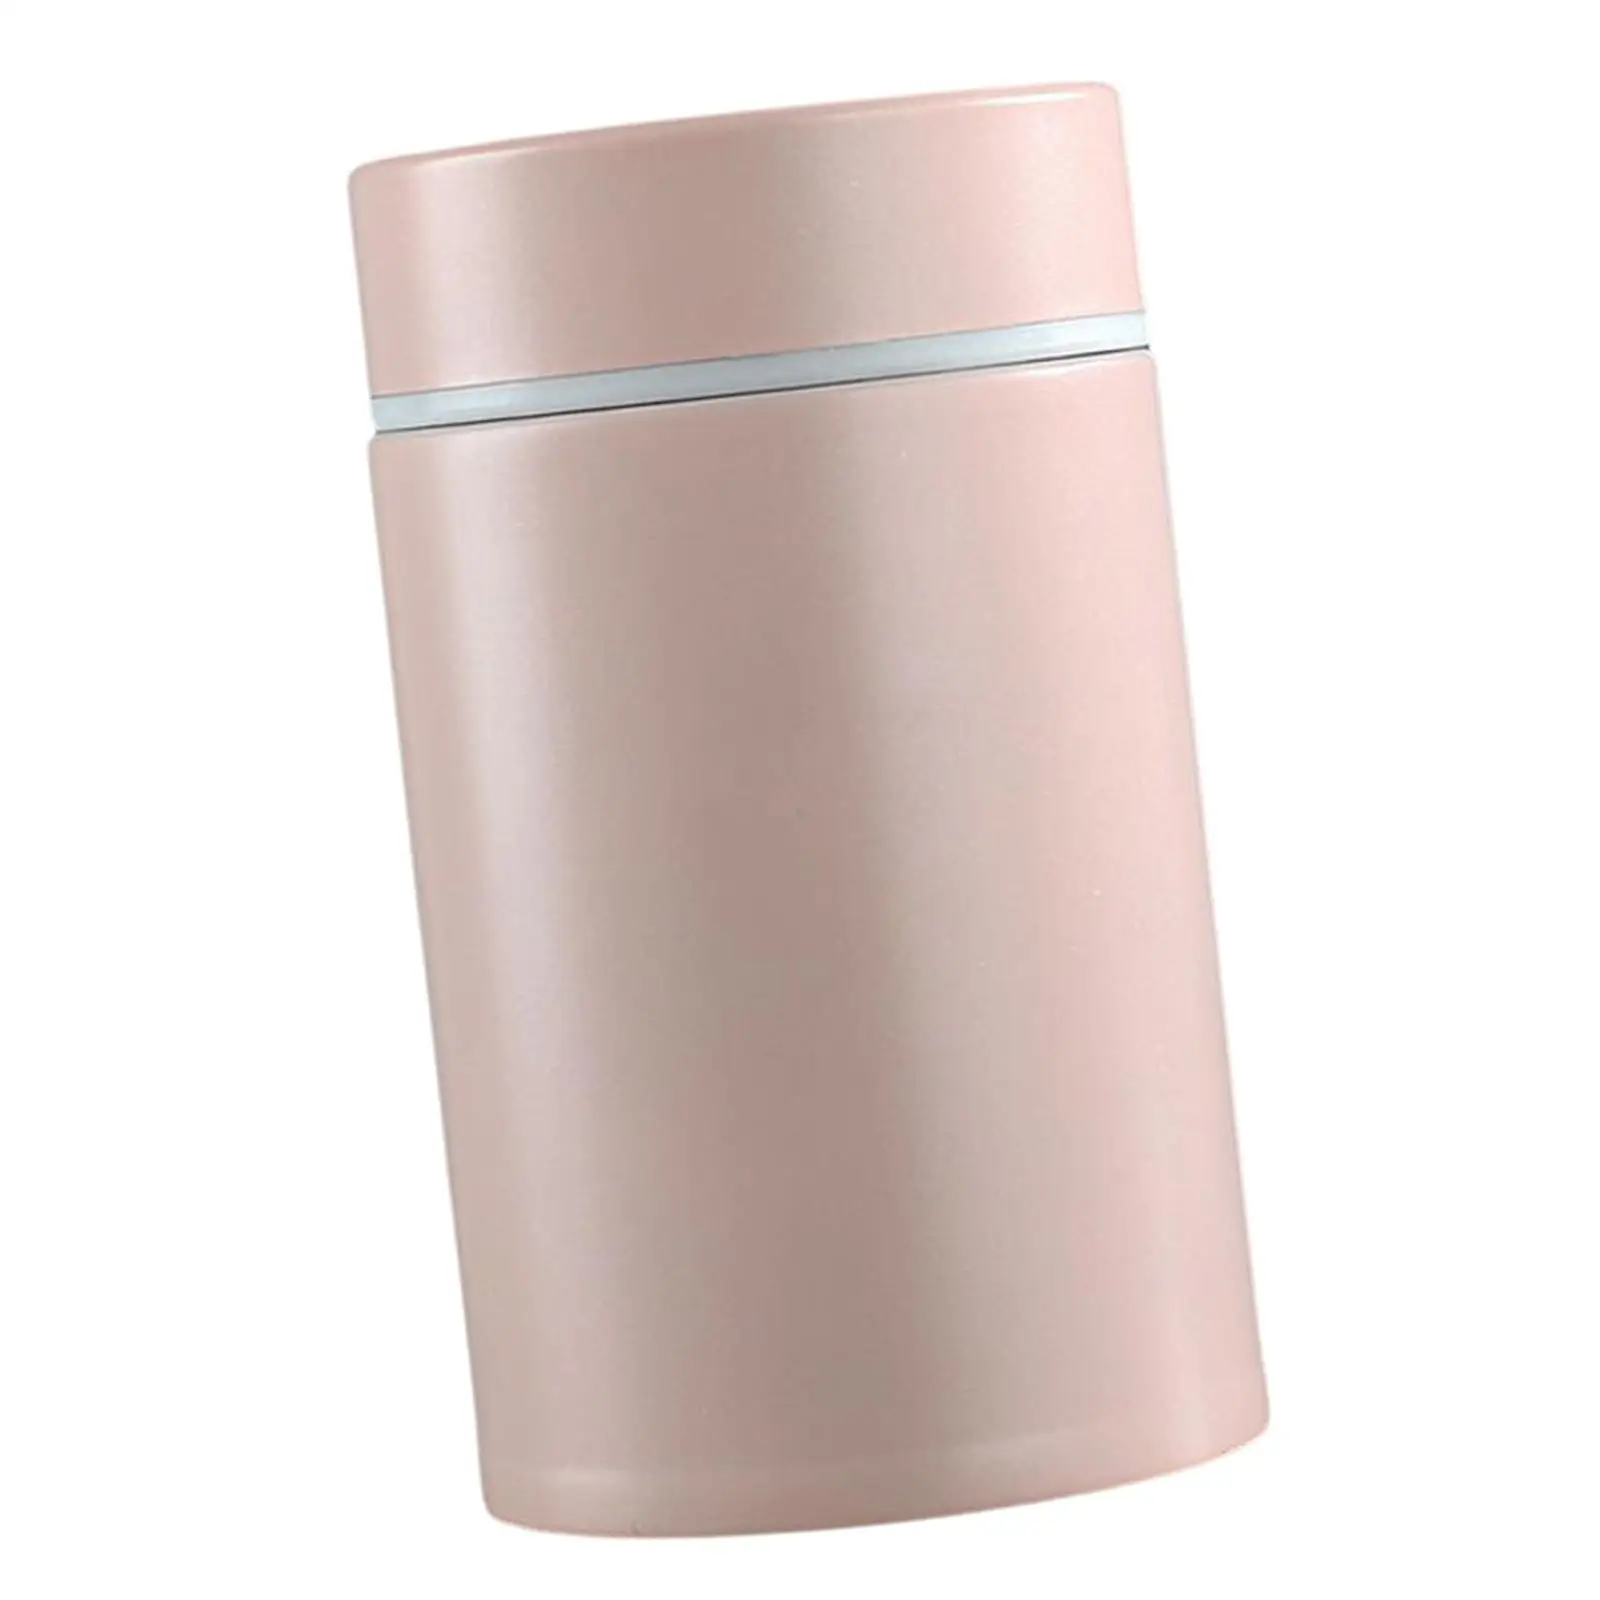 260ml Food Thermal Flask Multipurpose Stainless Steel Water Bottle Portable Soup Containers for Picnic Camping Home